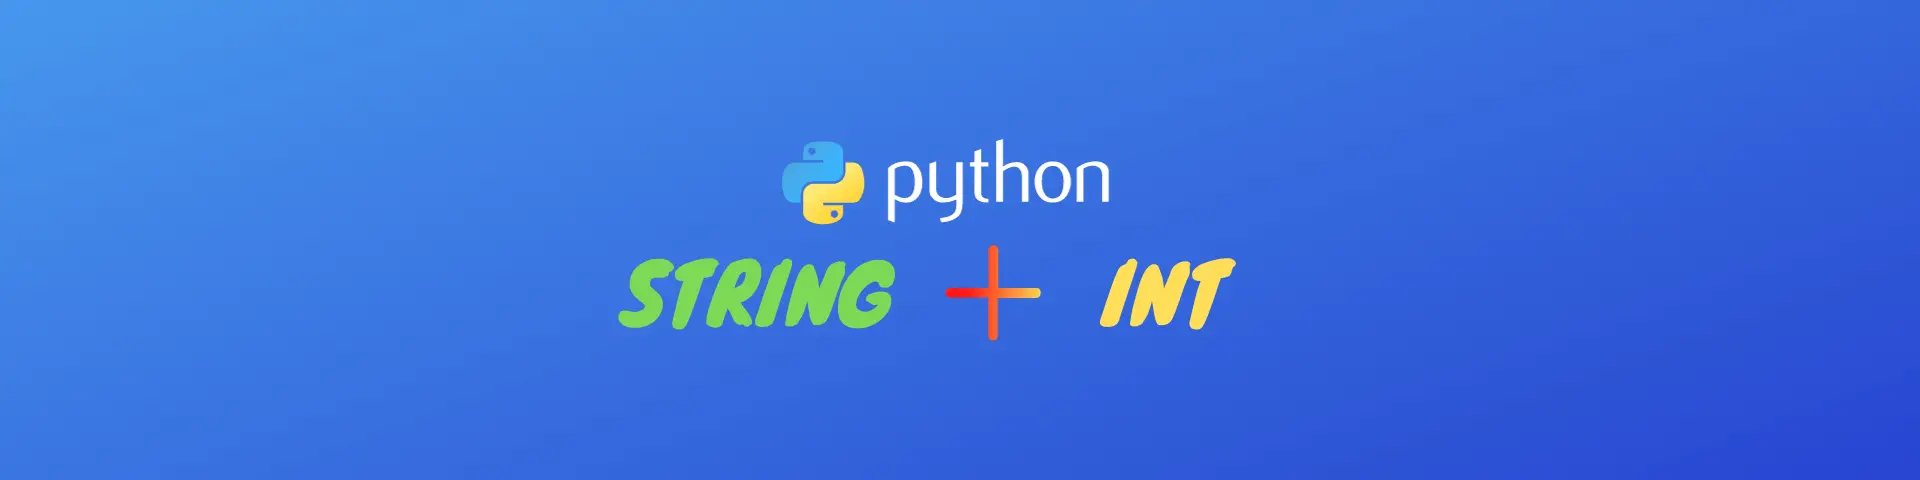 Concatenate string and int in Python